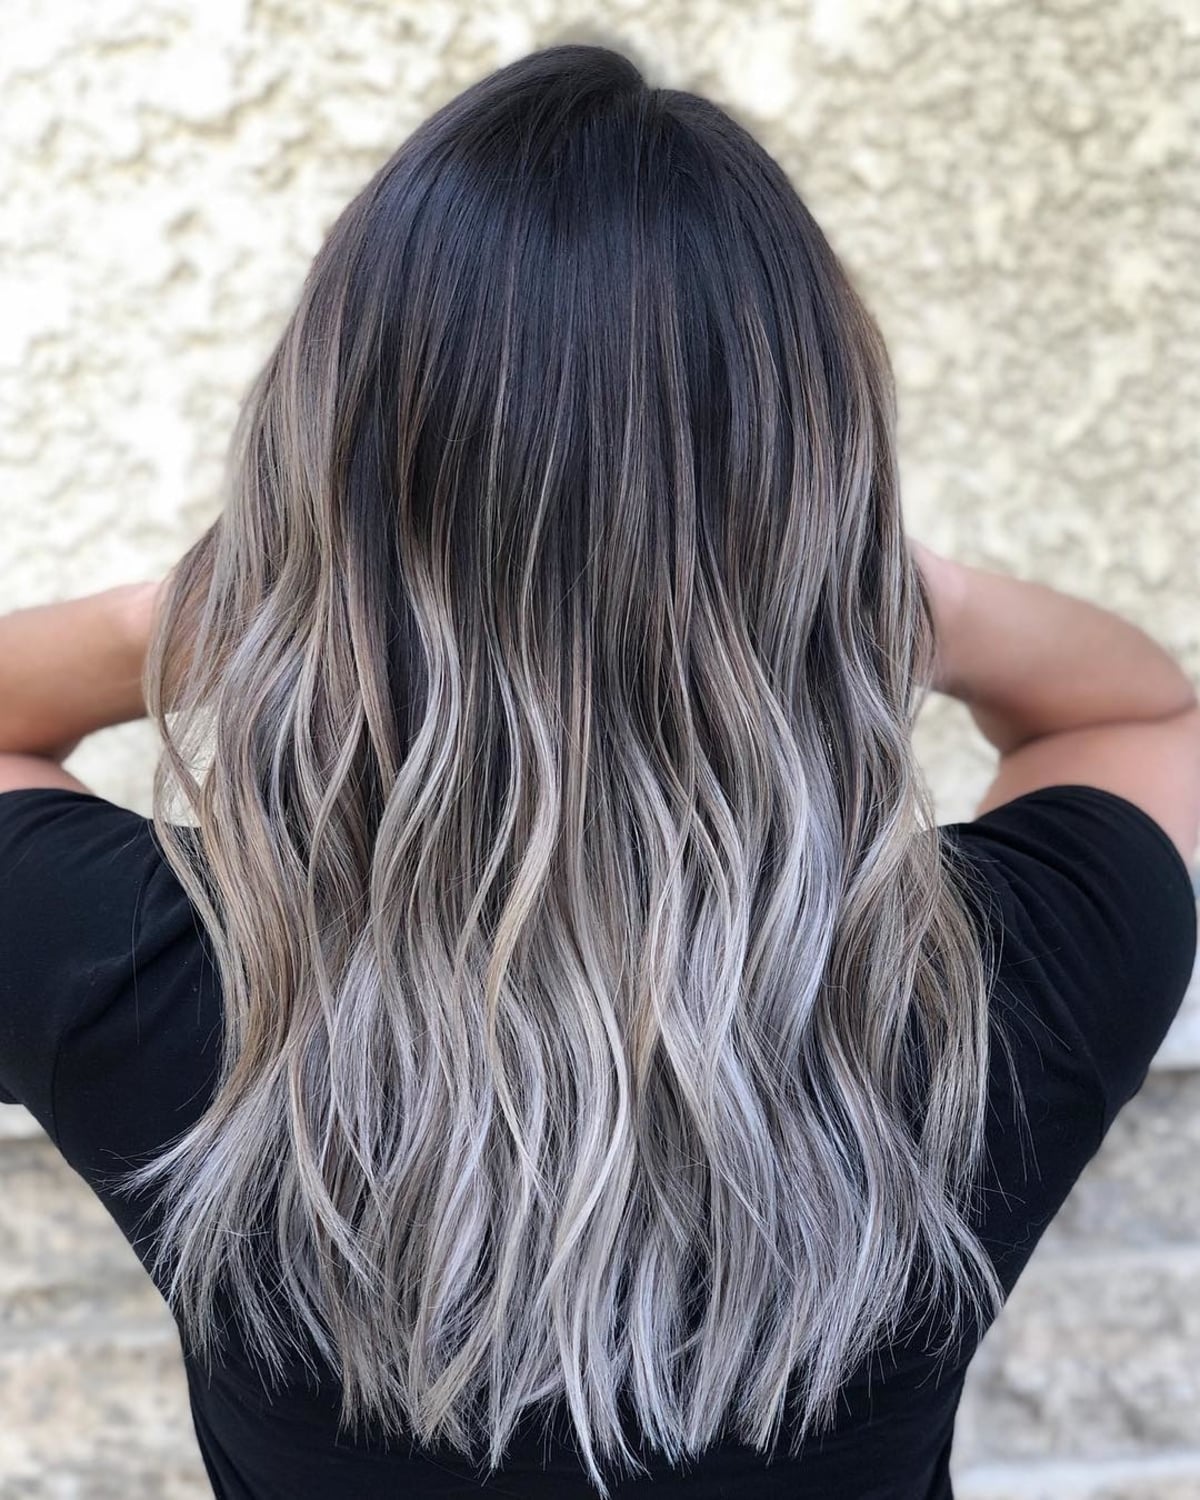 Icy blonde highlights with black hair